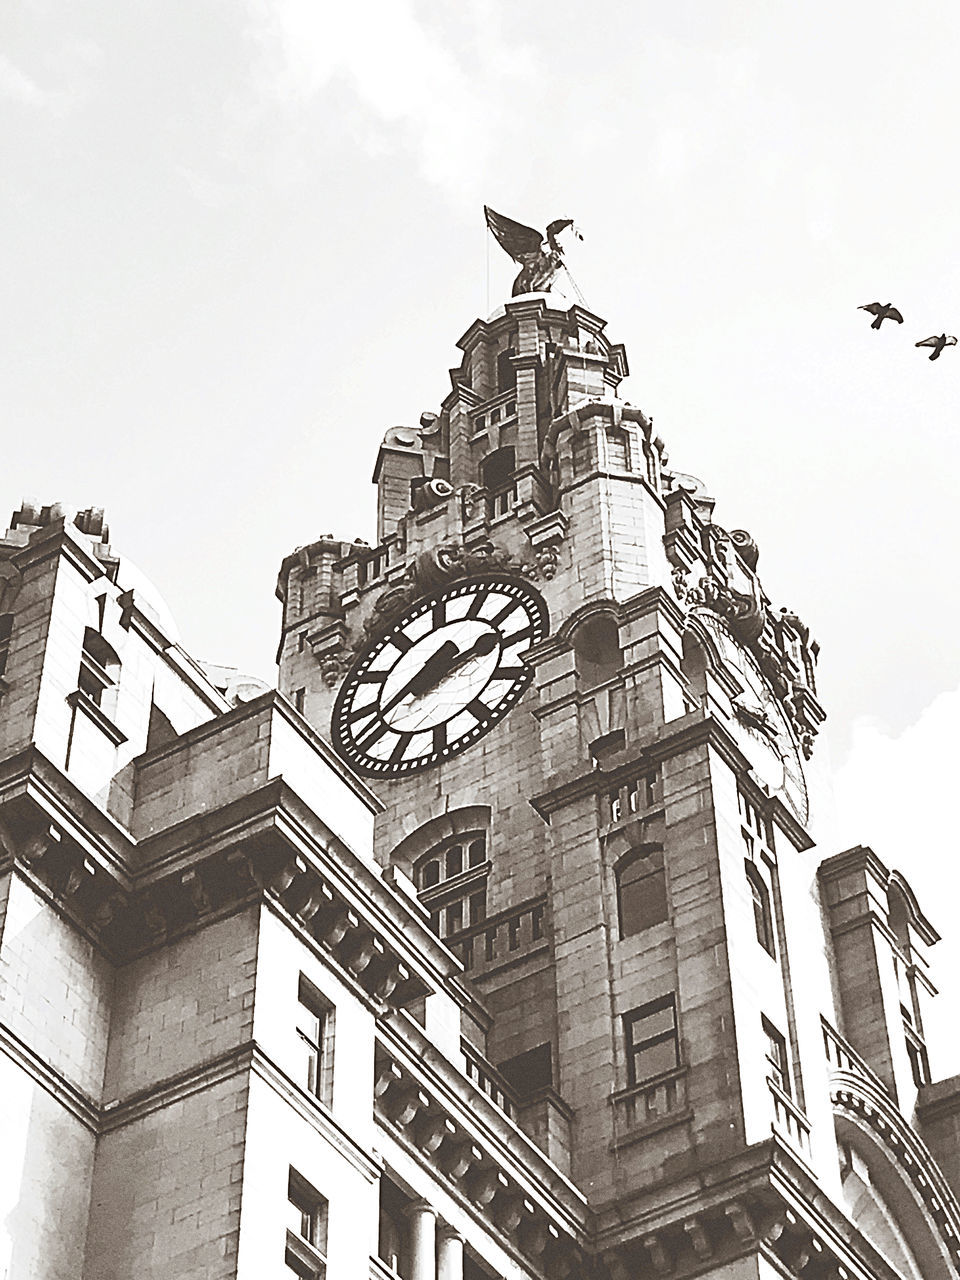 architecture, building exterior, built structure, sky, low angle view, building, landmark, black and white, city, bird, nature, no people, travel destinations, history, the past, tower, day, animal themes, outdoors, monochrome, animal, monochrome photography, travel, clock, flying